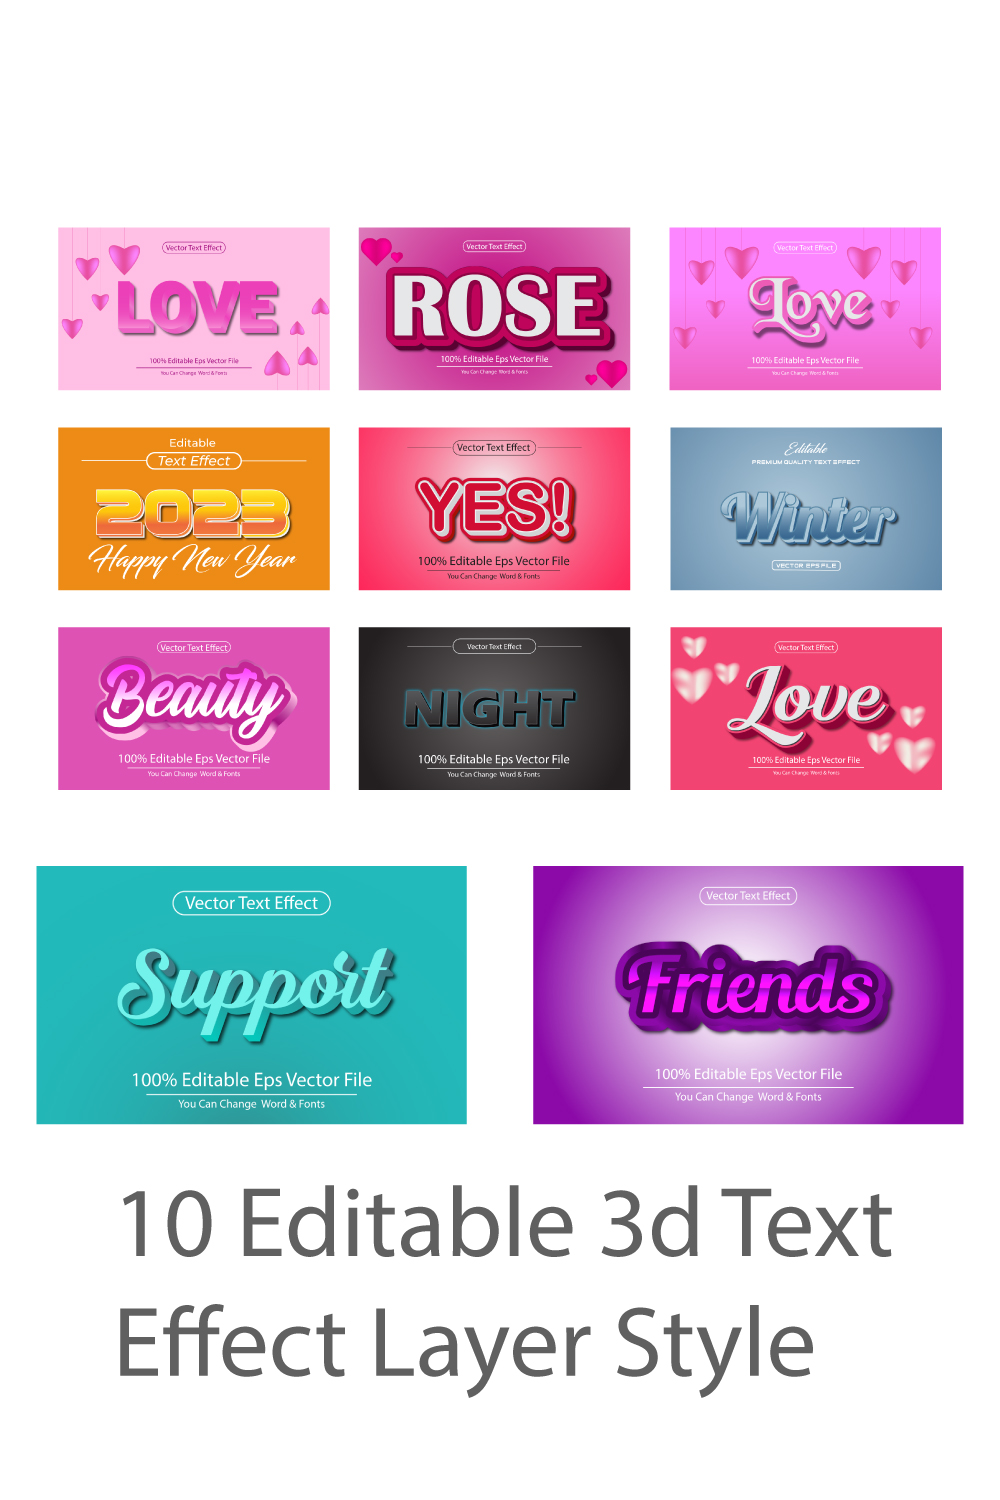 10 Editable 3D Text Effect Layer Style pinterest image.